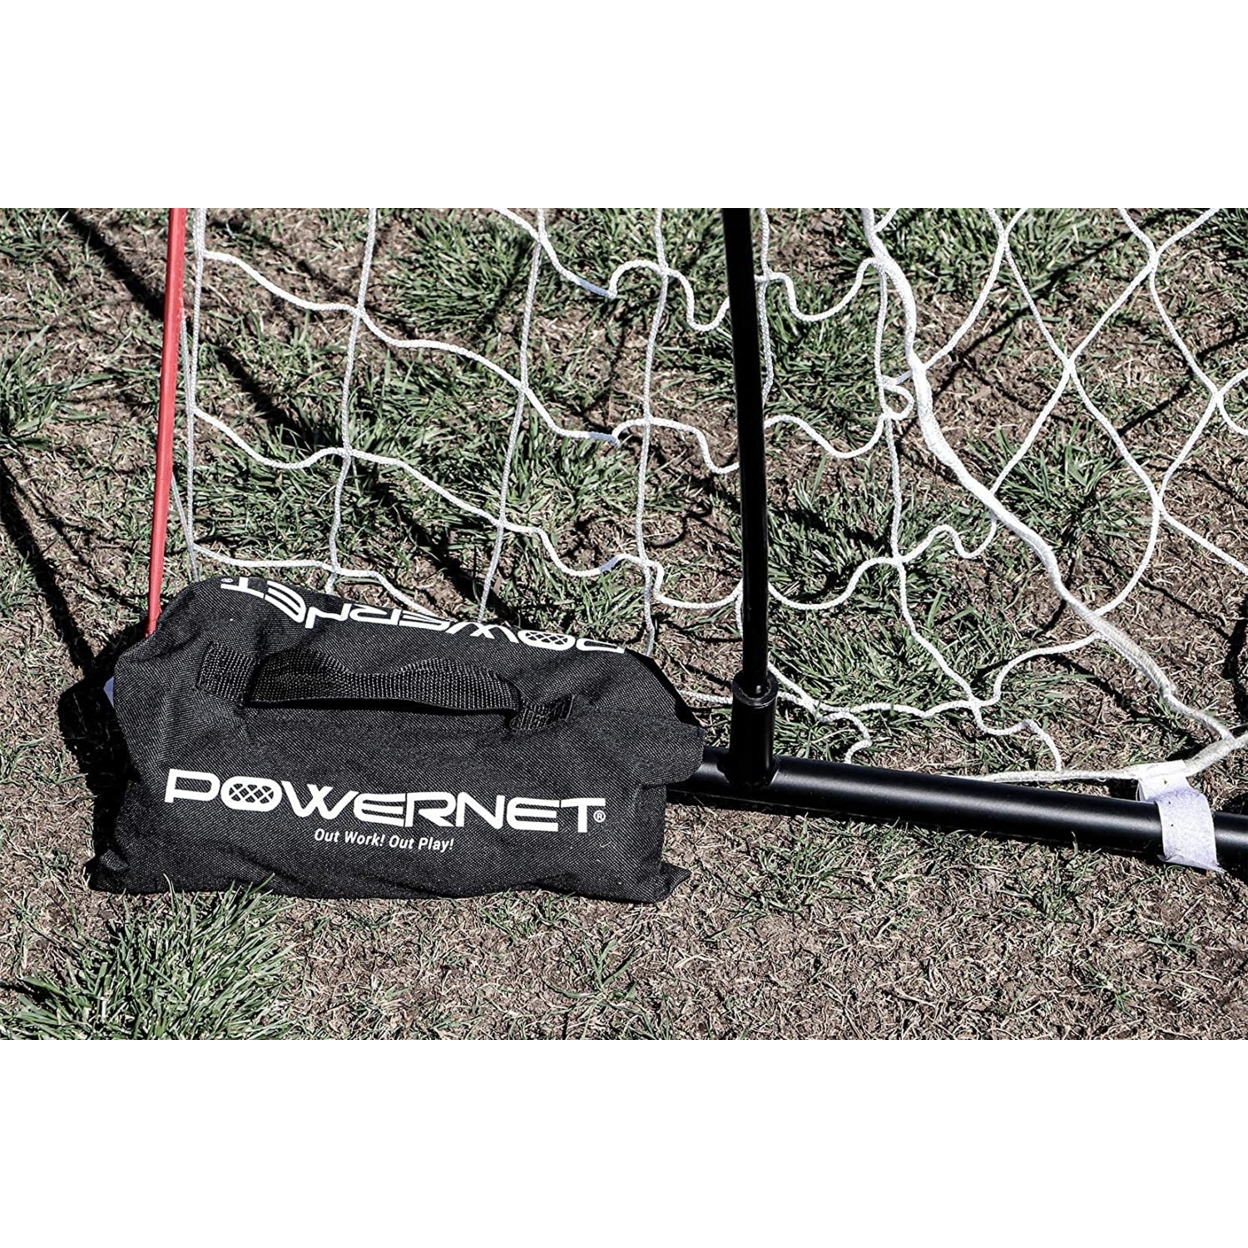 PowerNet 6x4 Ft Ultra Light Weight Soccer Goal With Sandbags For All Ages (1202)